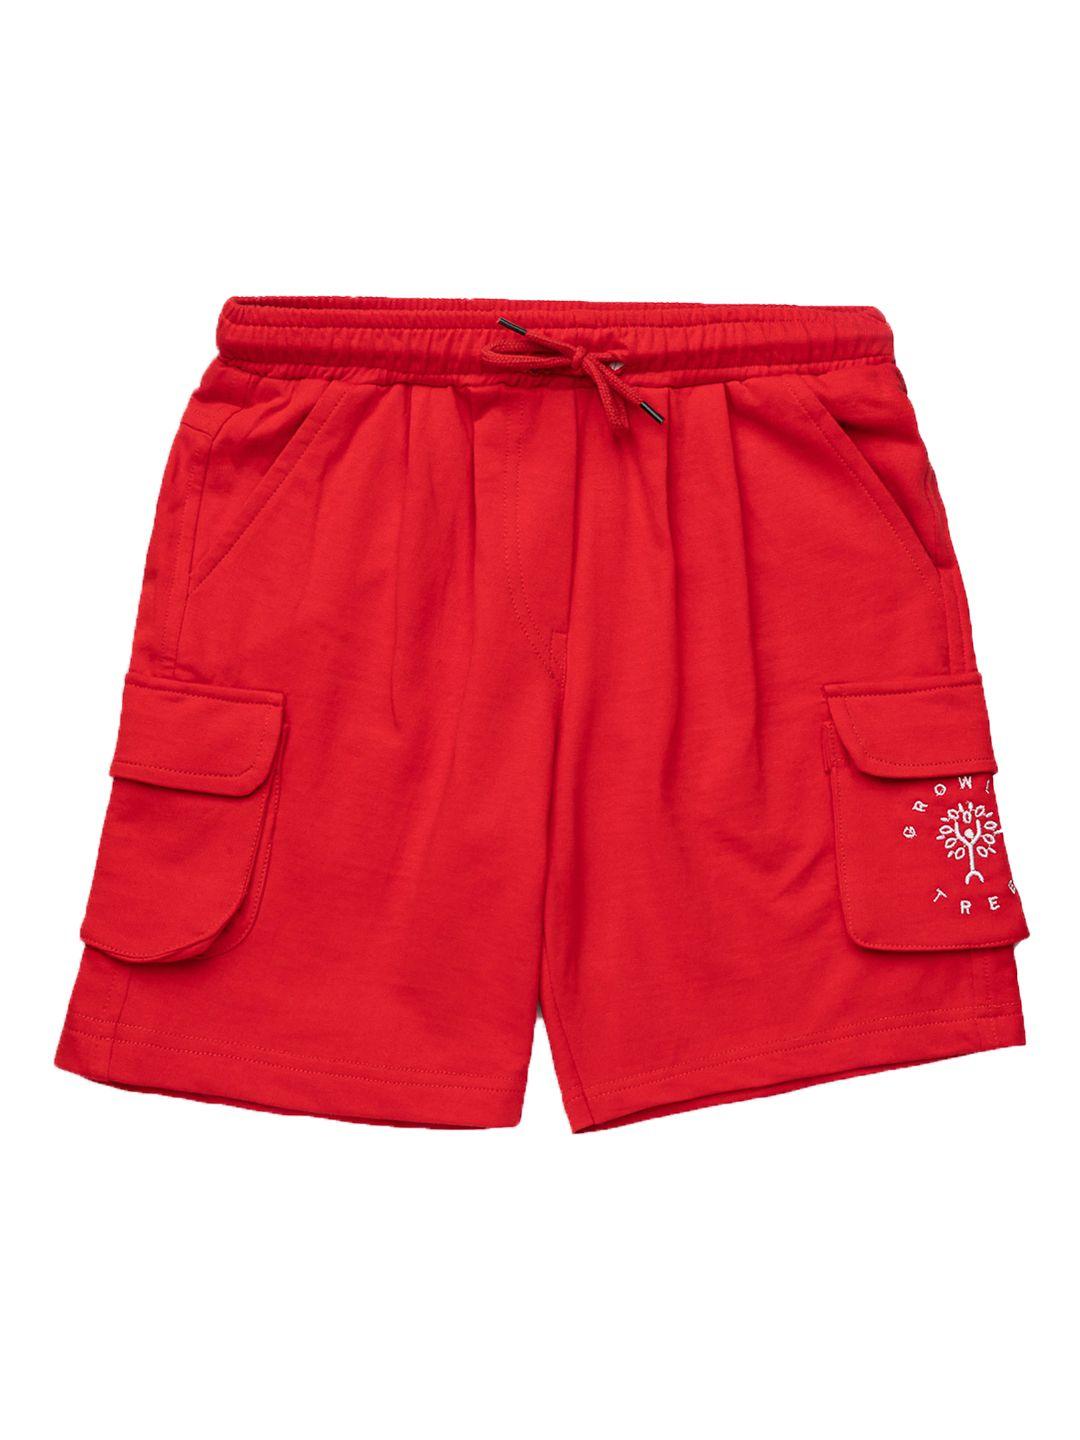 growing tree unisex kids red outdoor antimicrobial technology shorts